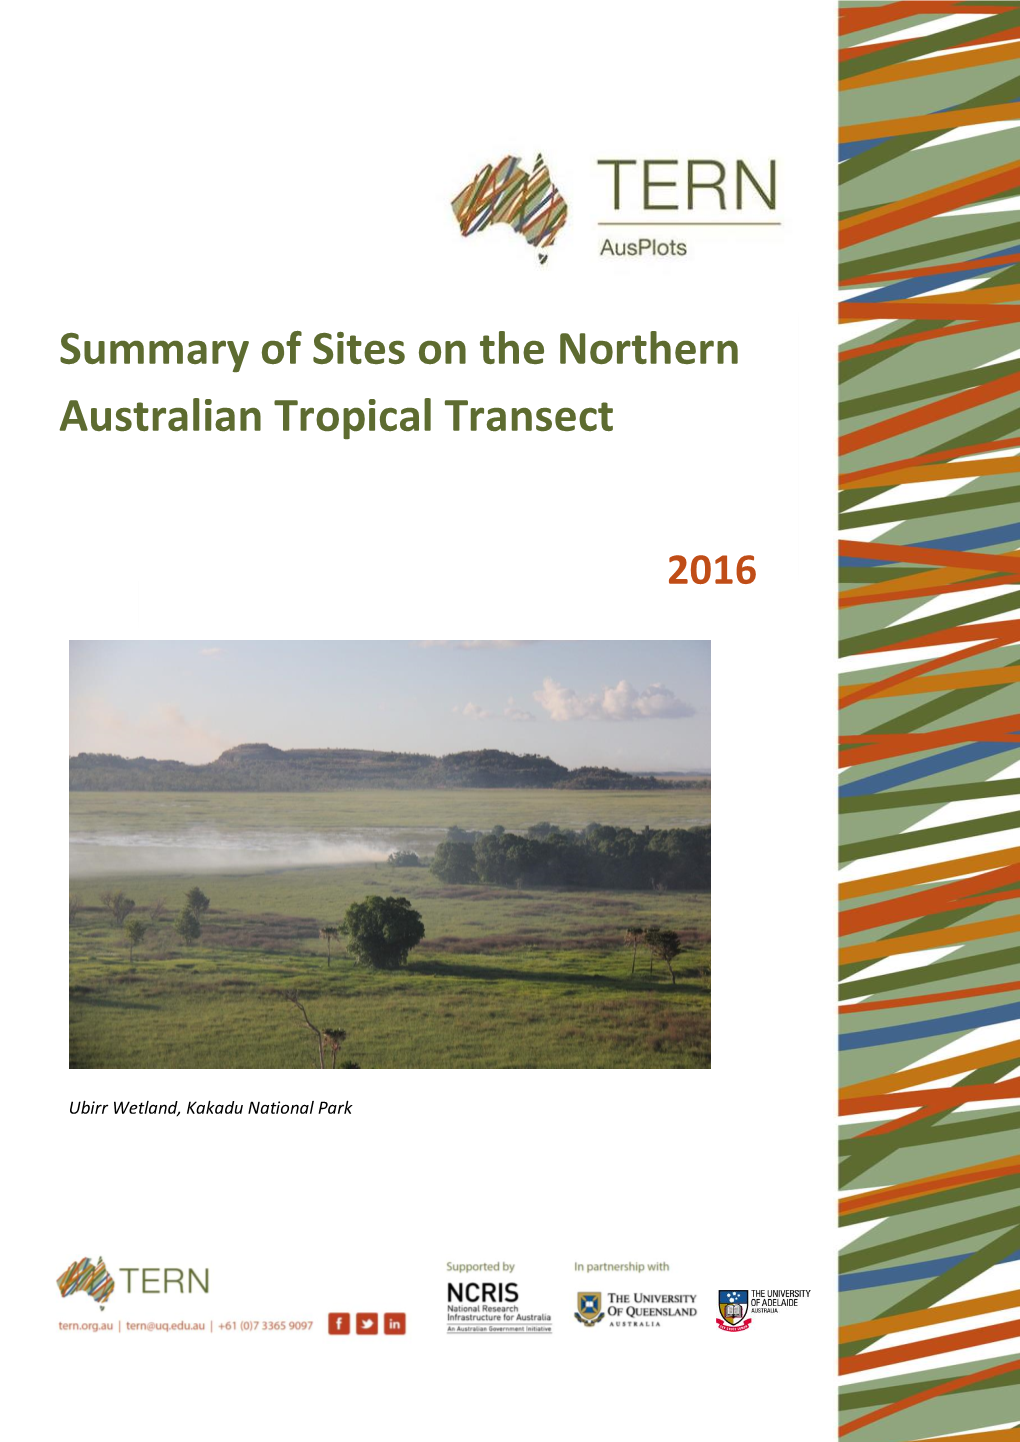 Summary of Sites on the Northern Australian Tropical Transect